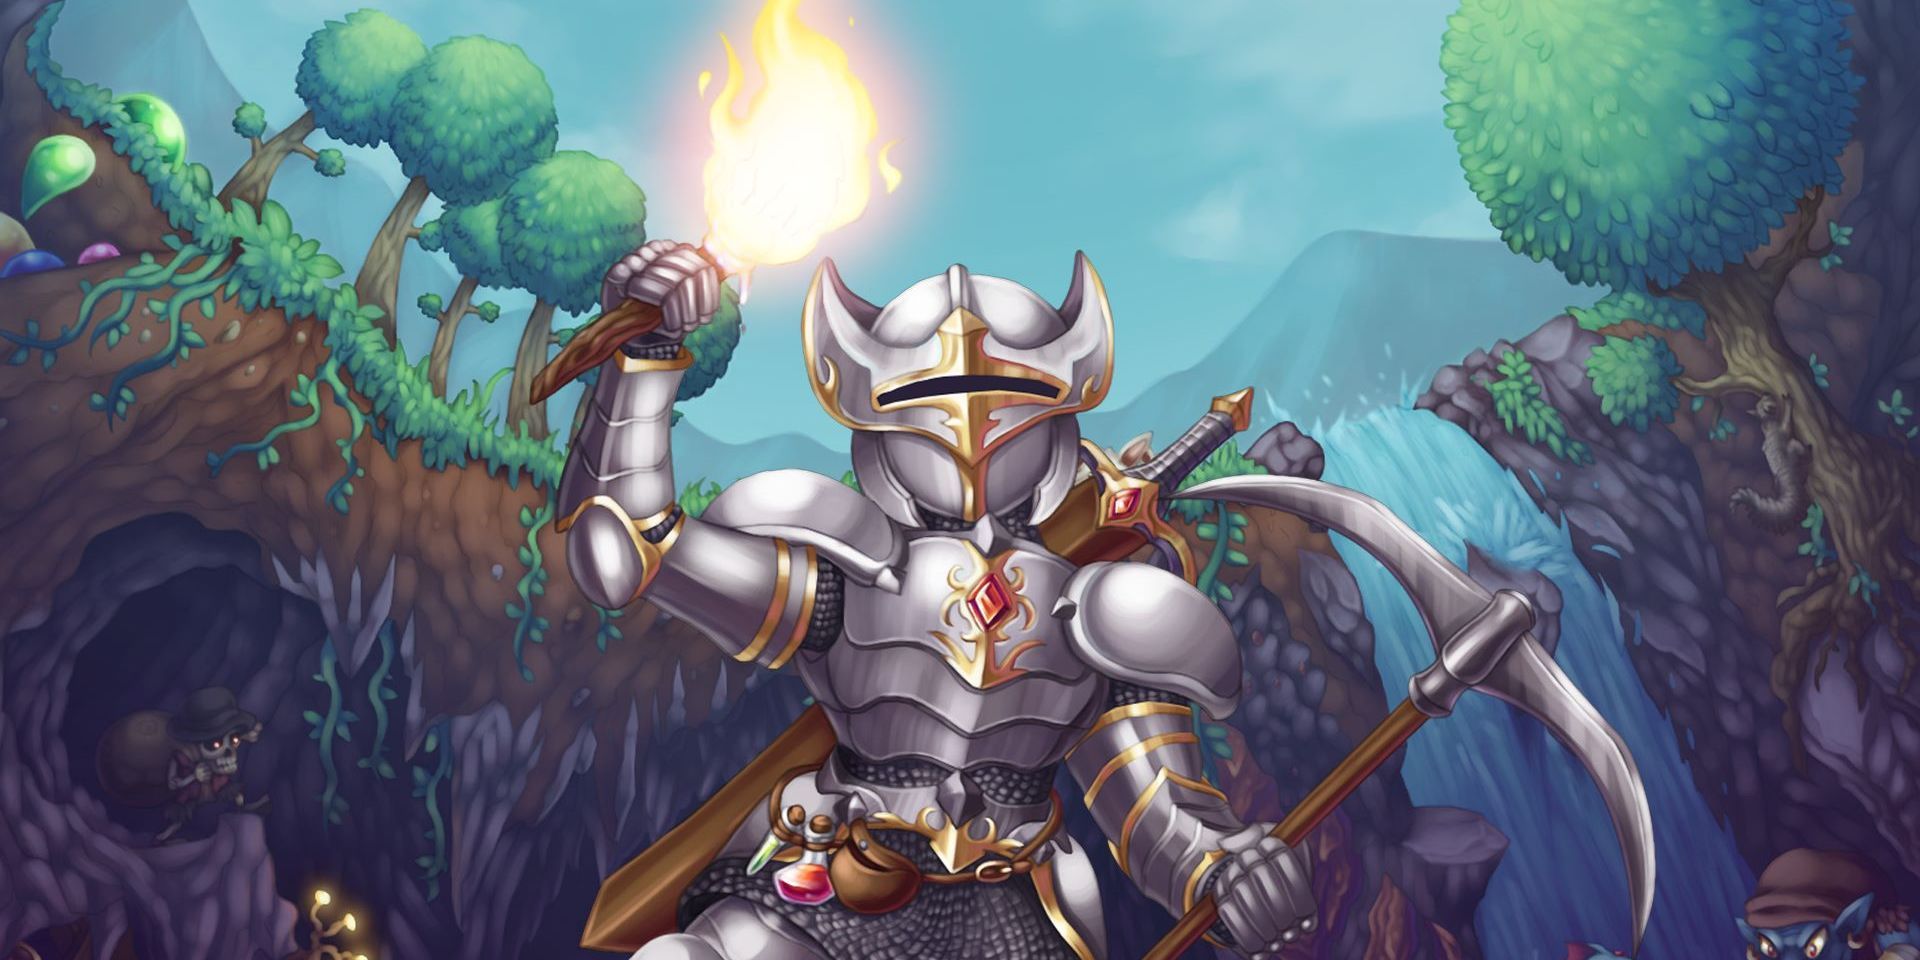 a promo picture for Terraria showing a person in armor with a torch in their hand